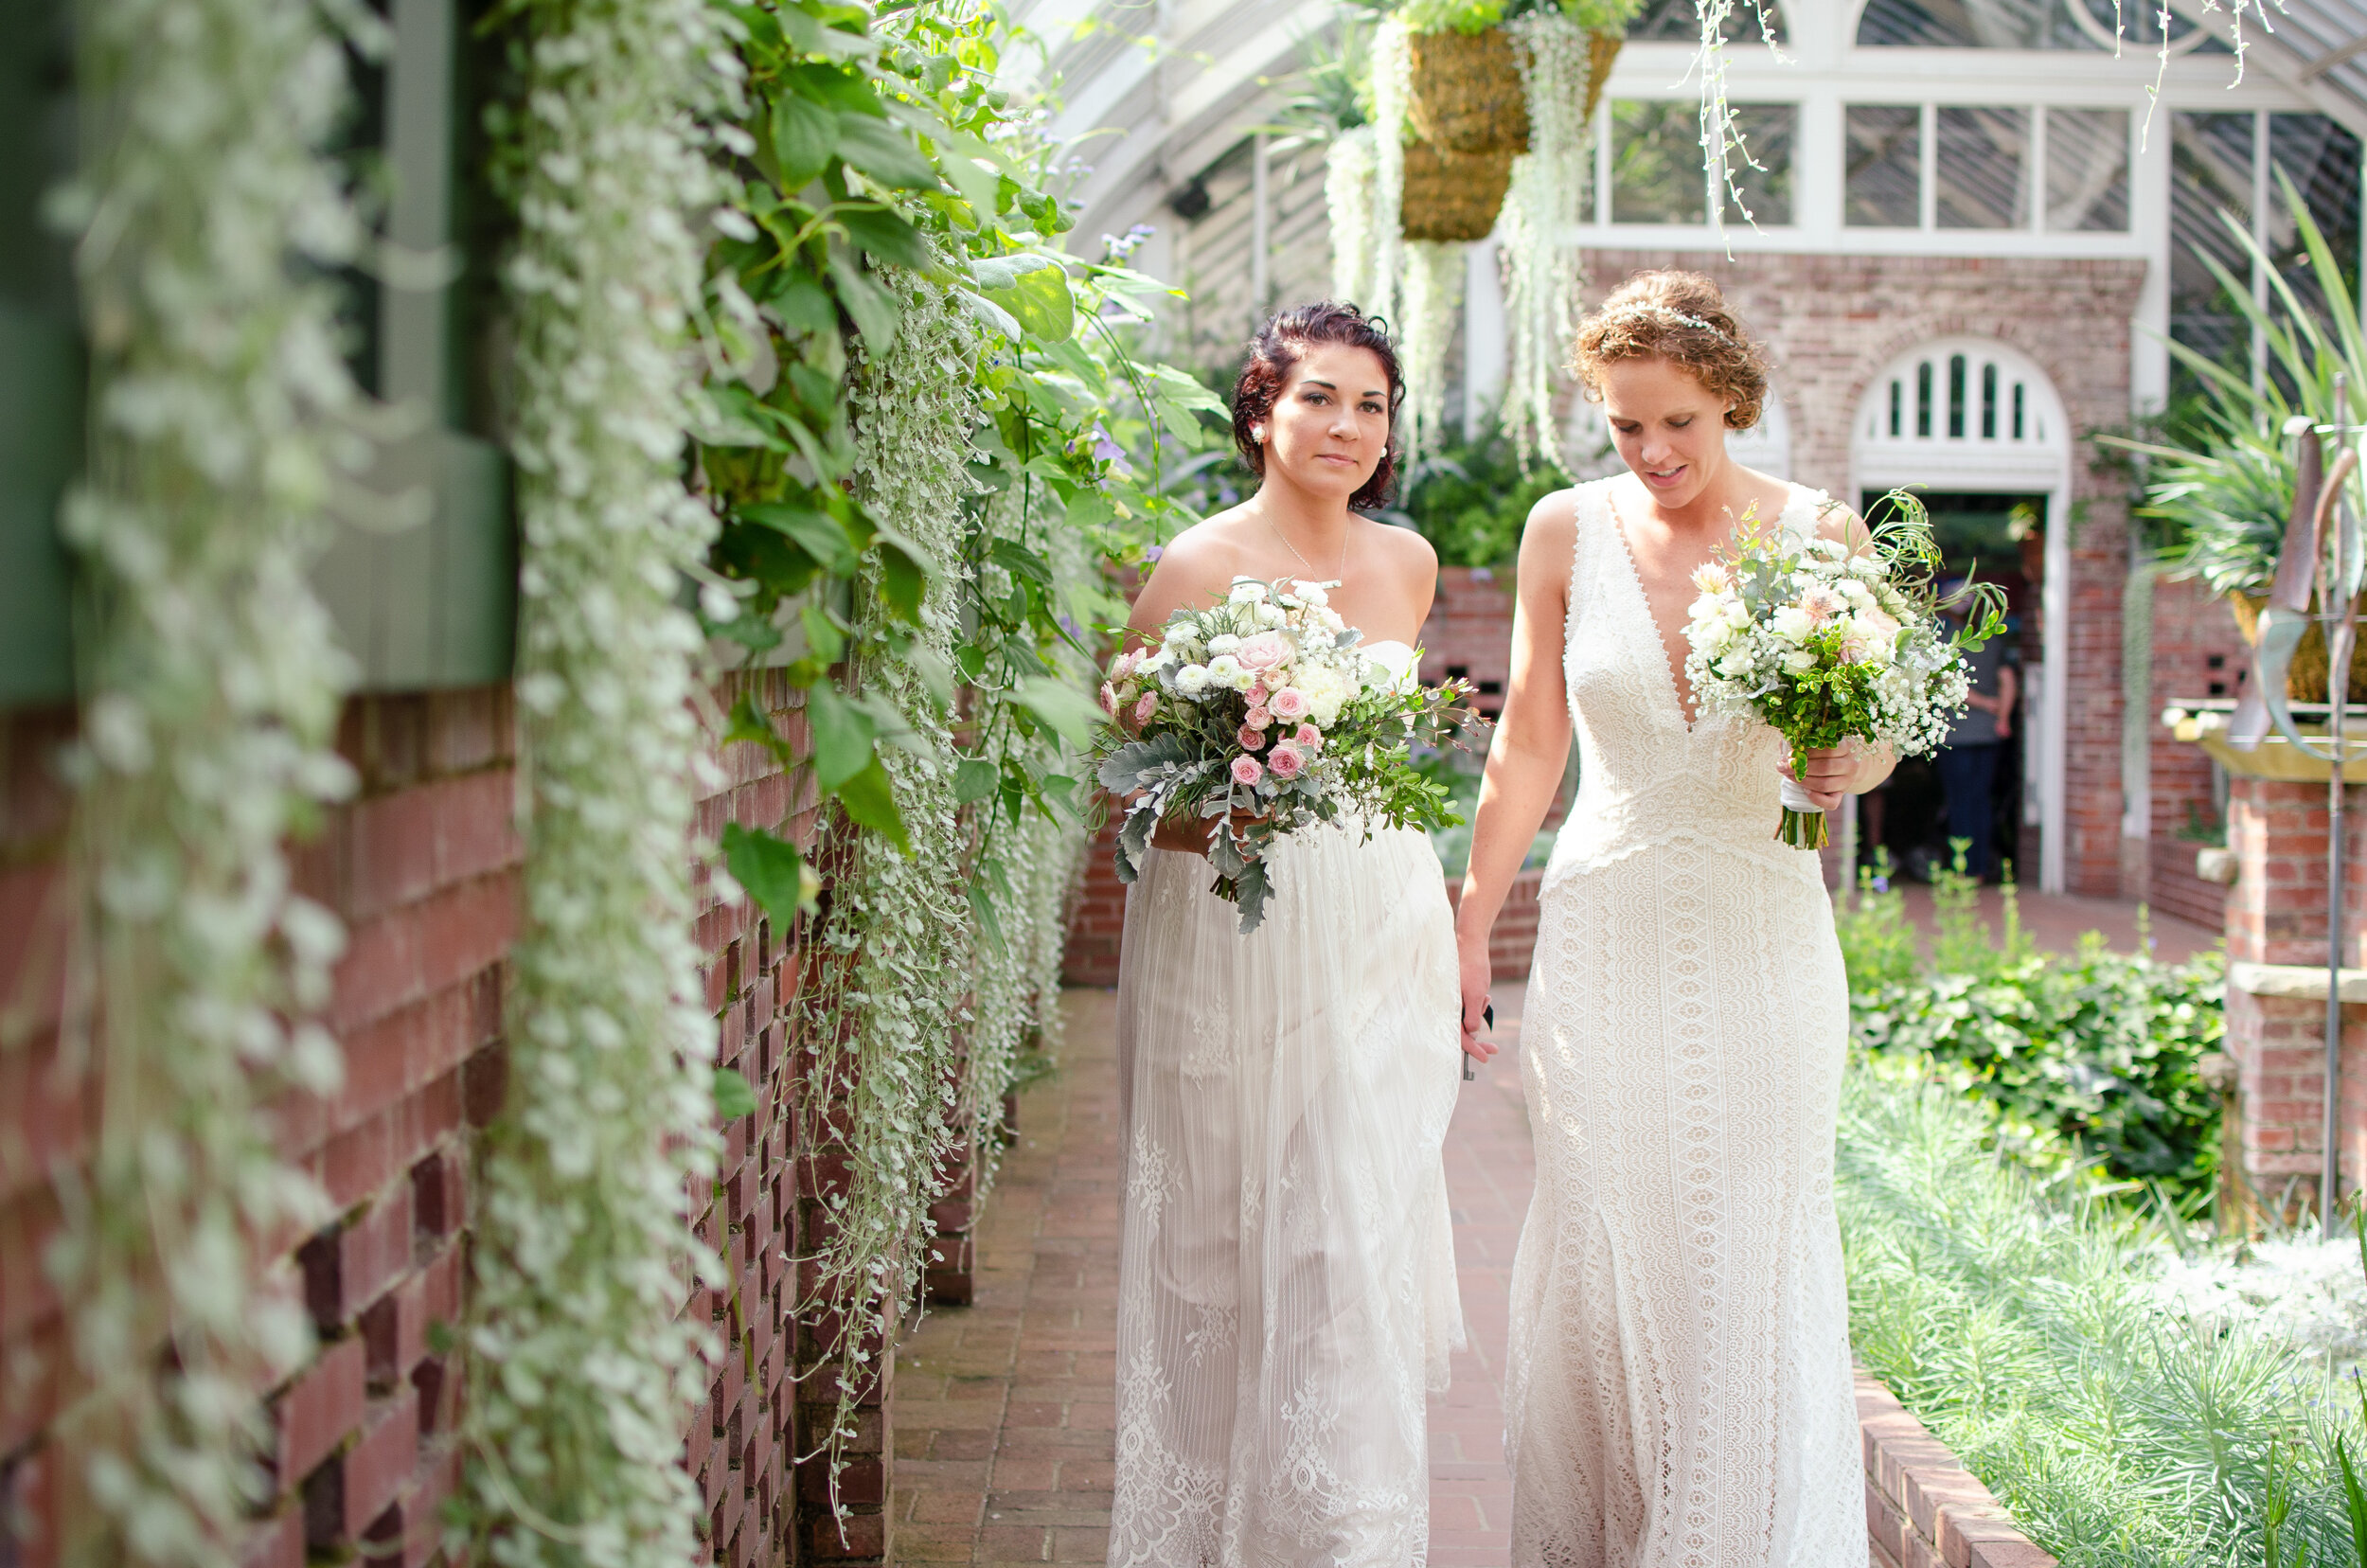 Erin and Jessica's Fabulously Floral Wedding at Phipps Conservatory